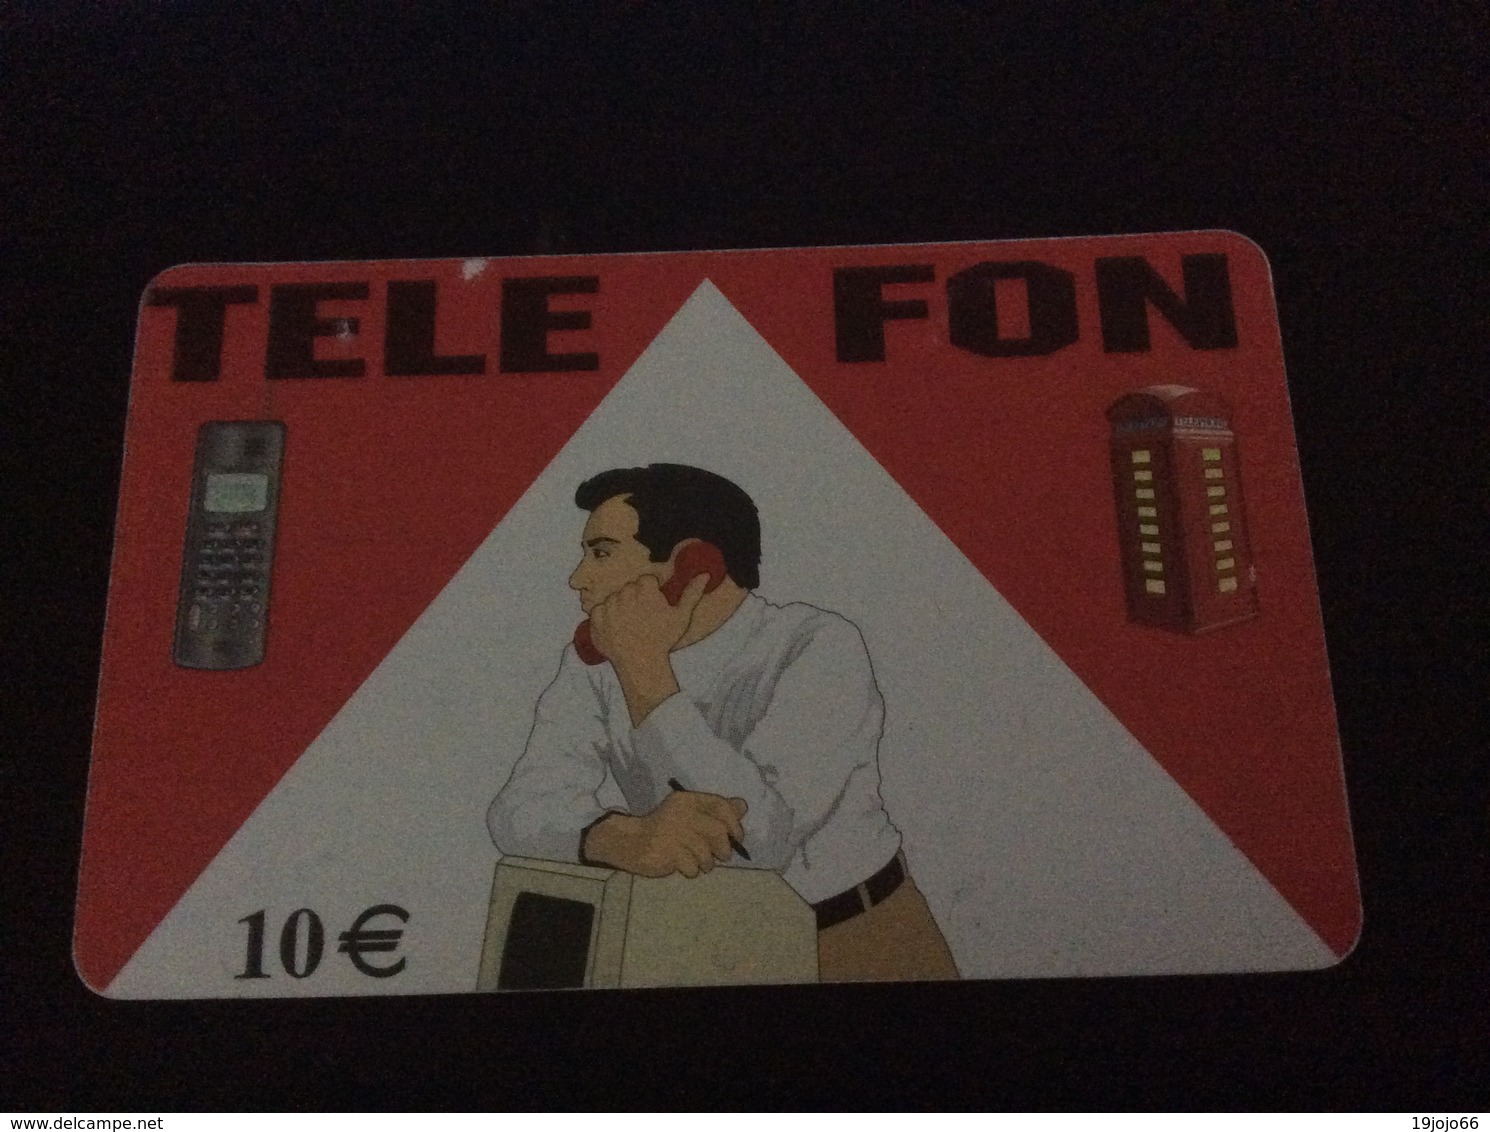 10 Euro  Tele Fon -   -  Little Printed  -   Used Condition - [2] Mobile Phones, Refills And Prepaid Cards